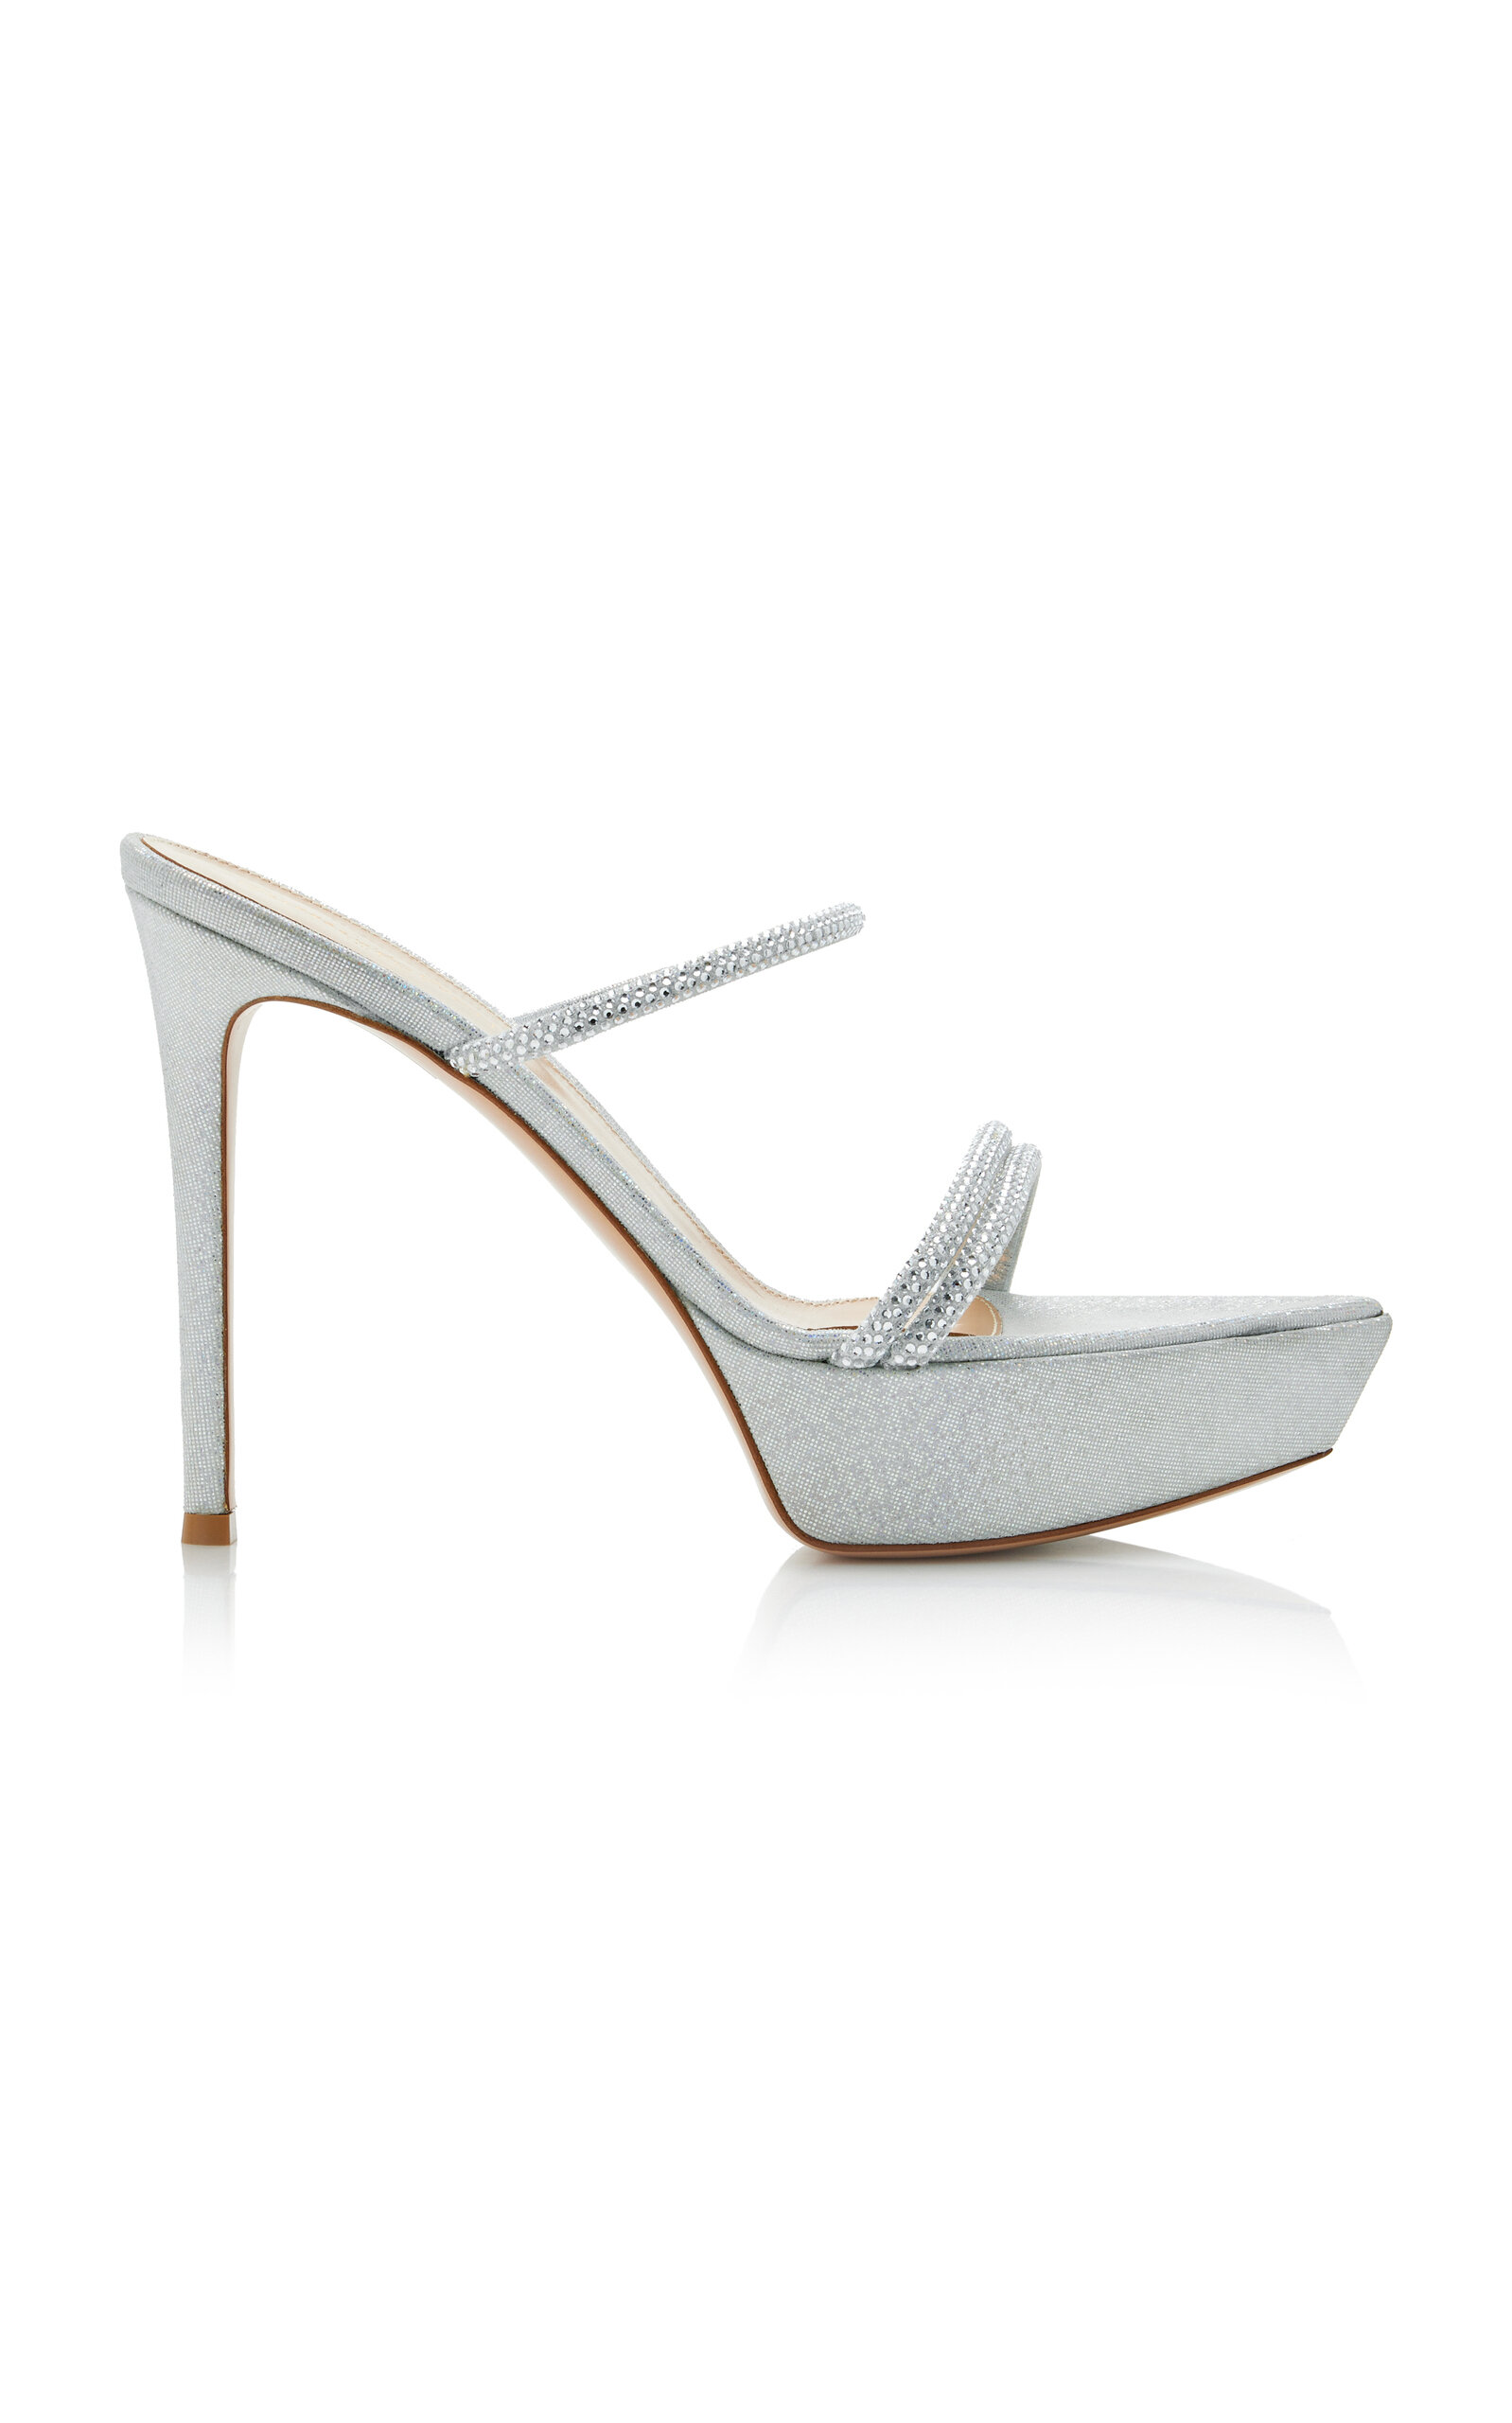 Gianvito Rossi Exclusive Cannes Leather Platform Sandals In White